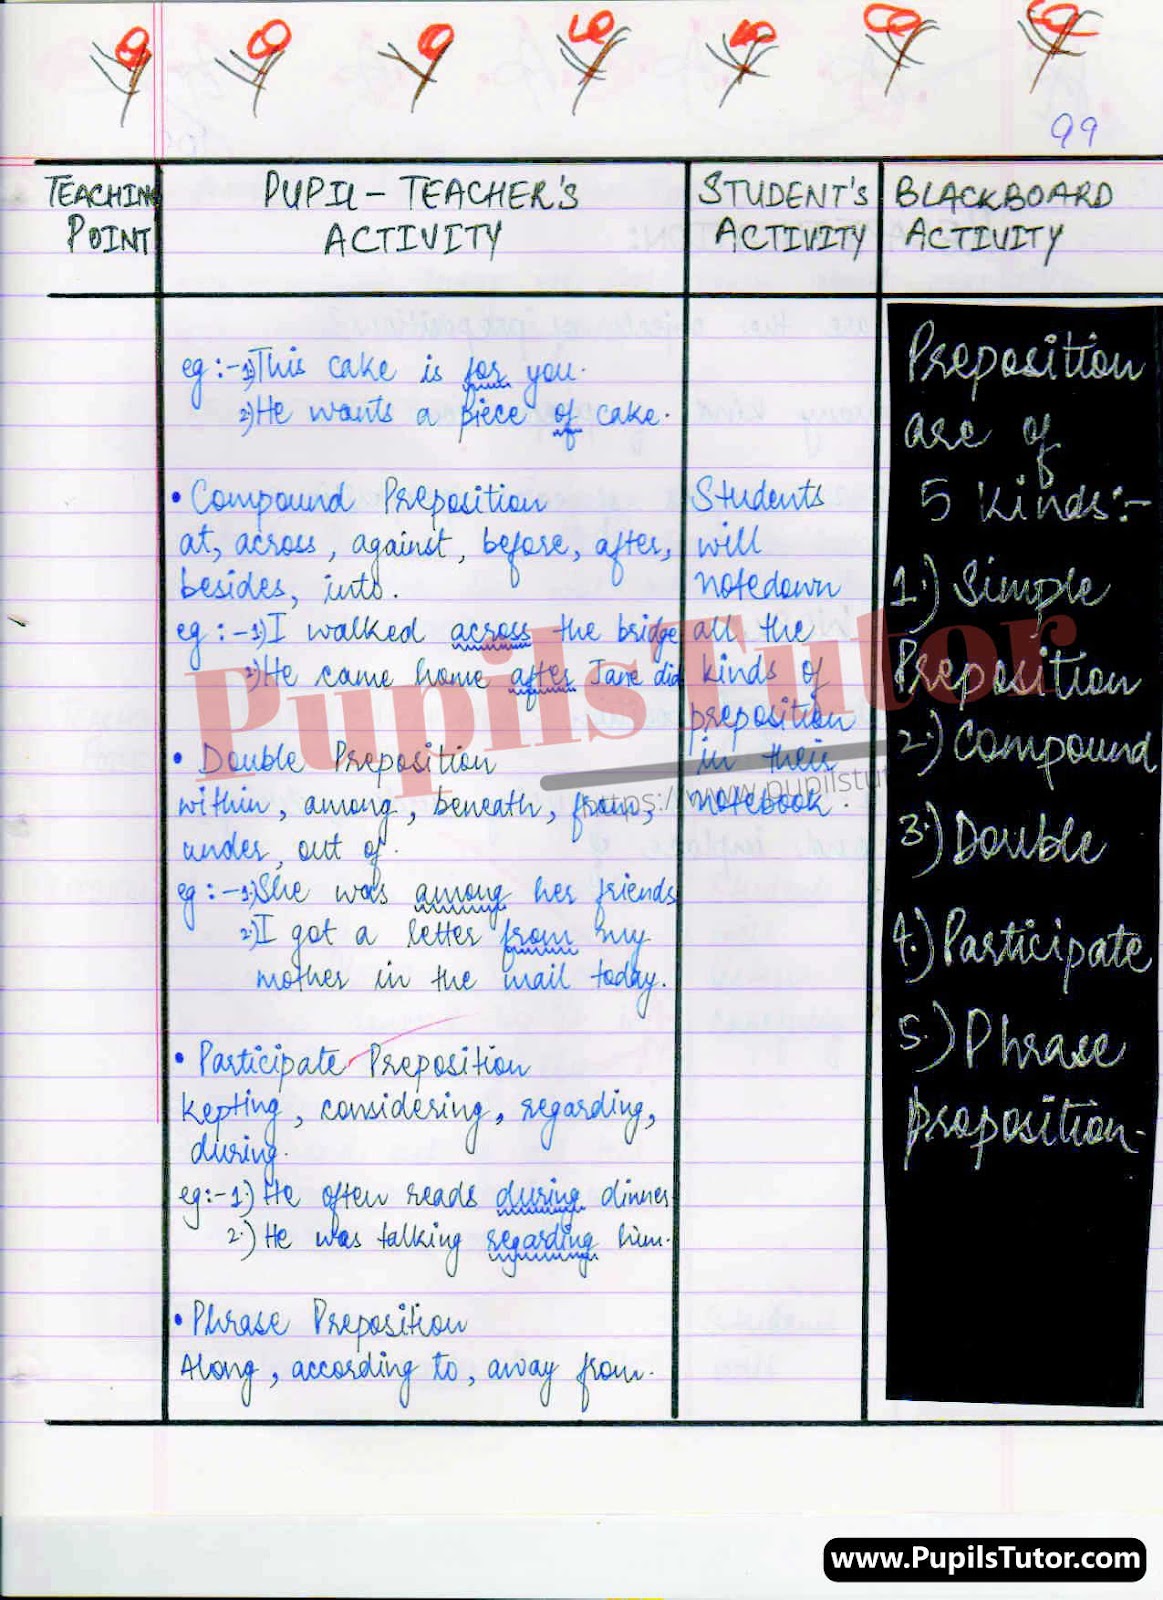 Lesson Plan On Preposition For Class 5 To 8th.  – [Page And Pic Number 5] – https://www.pupilstutor.com/